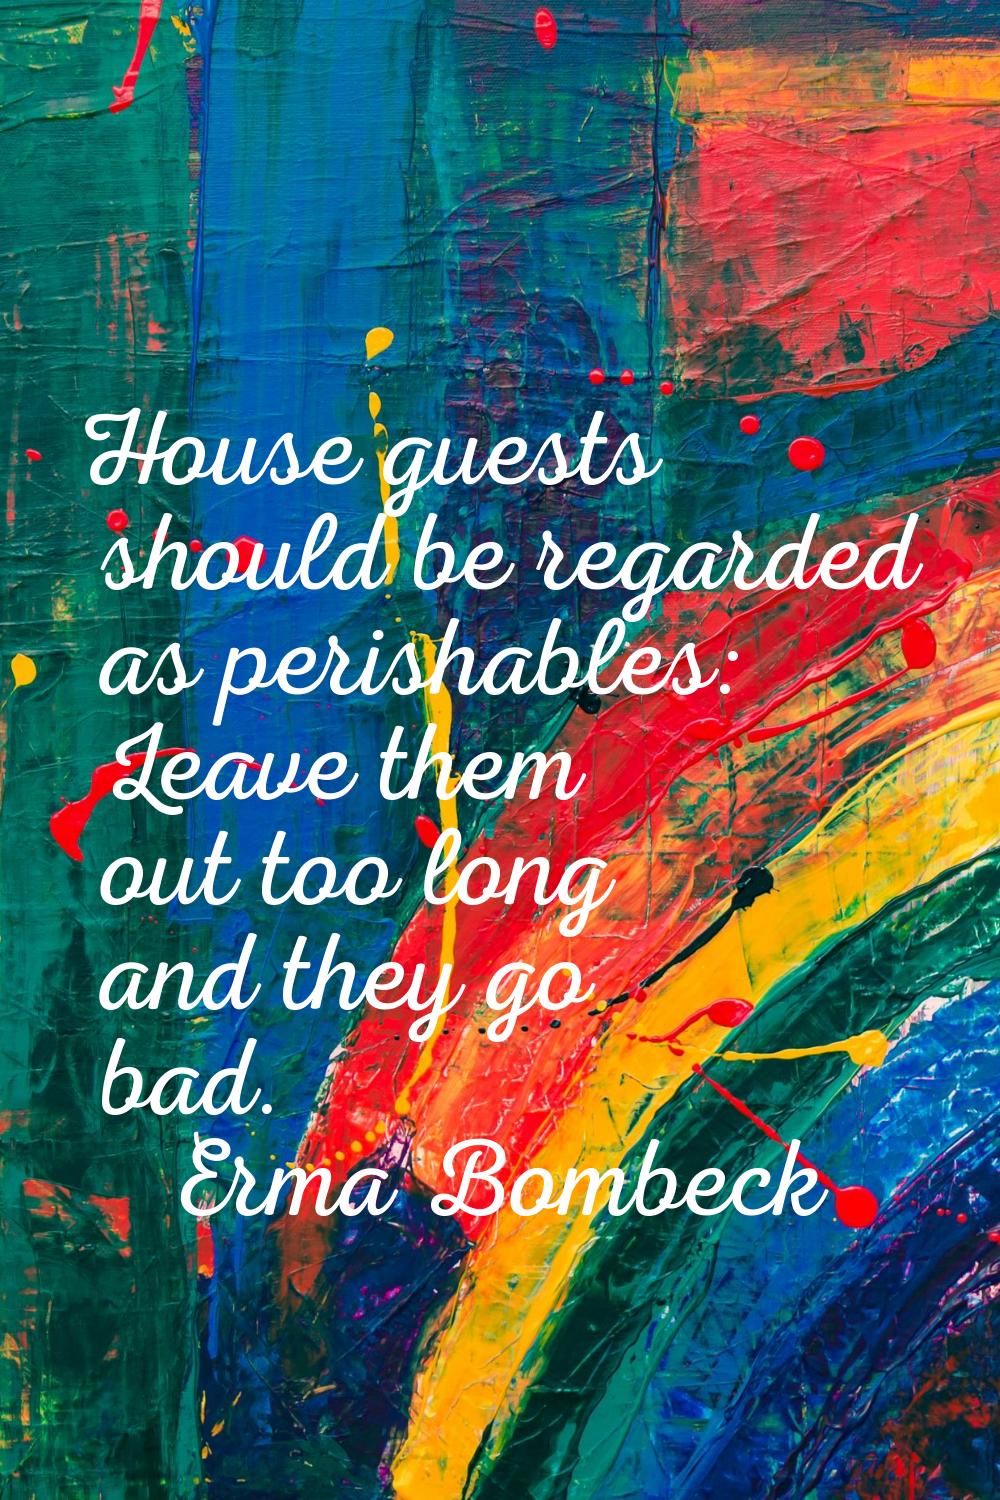 House guests should be regarded as perishables: Leave them out too long and they go bad.